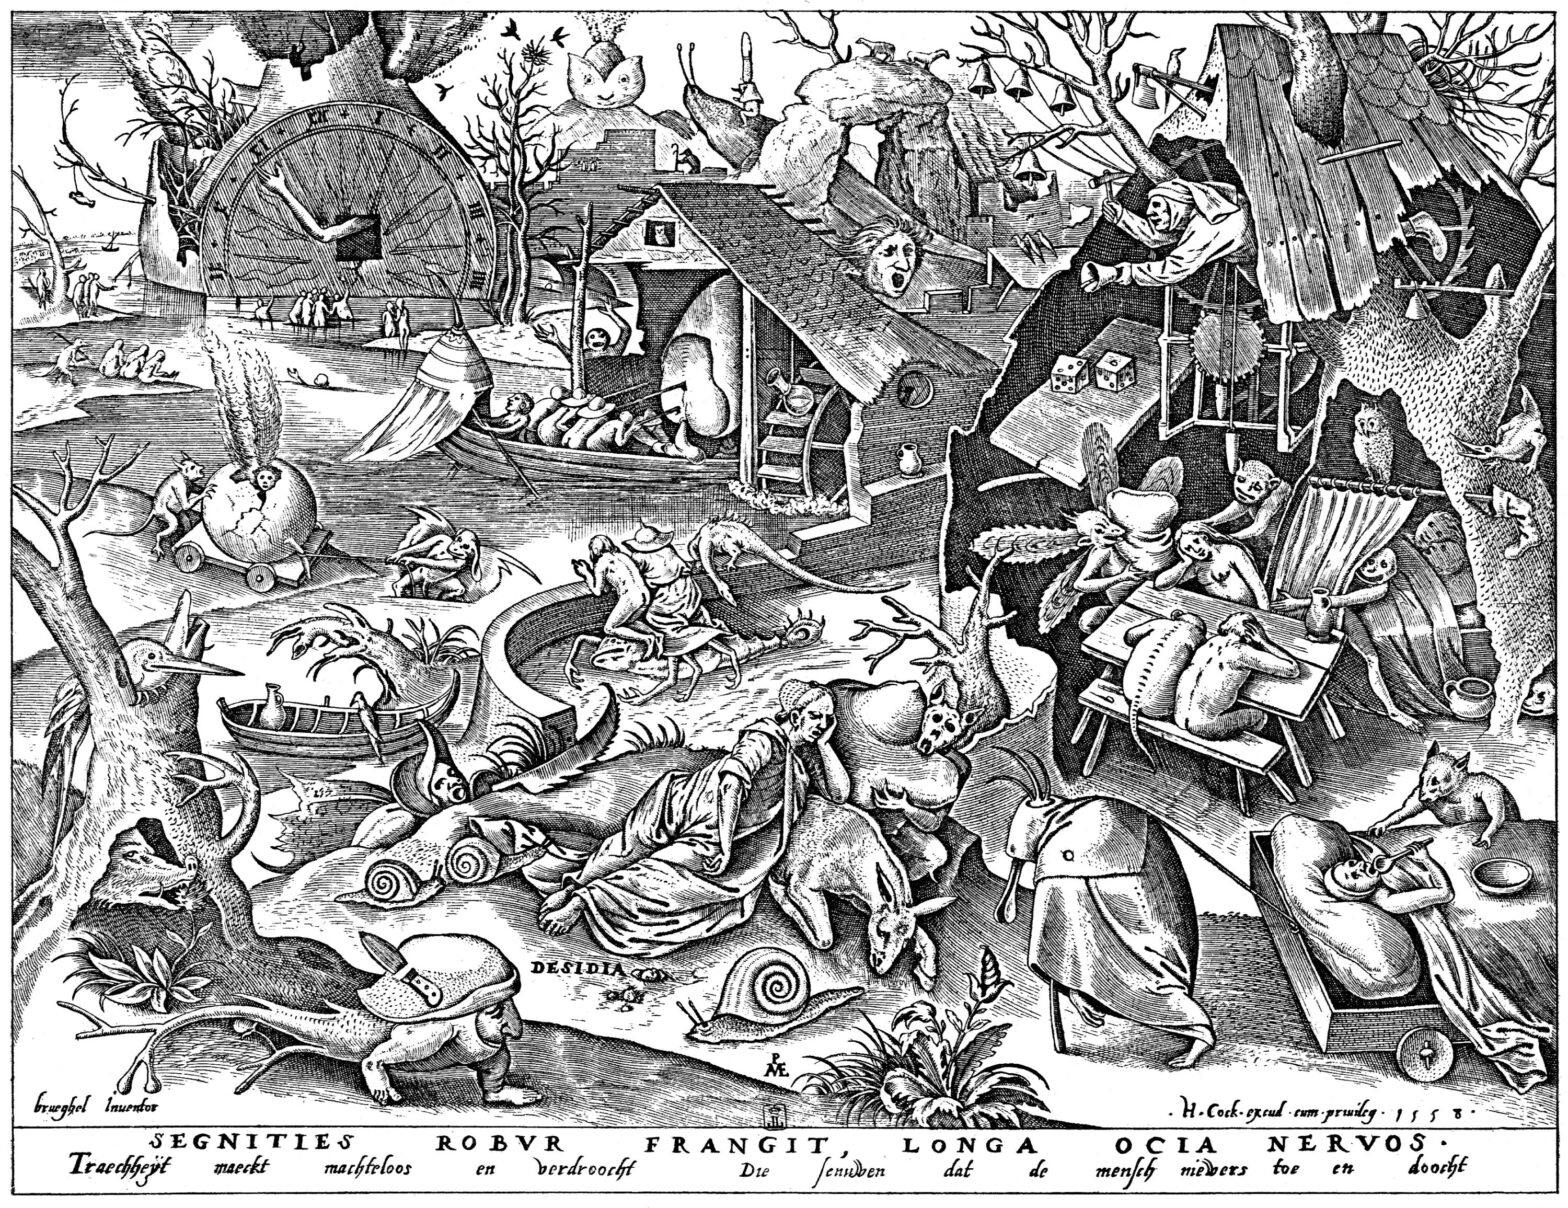 Pieter Bruegel the Elder: The Seven Deadly Sins or the Seven Vices – Disidia (acedia)